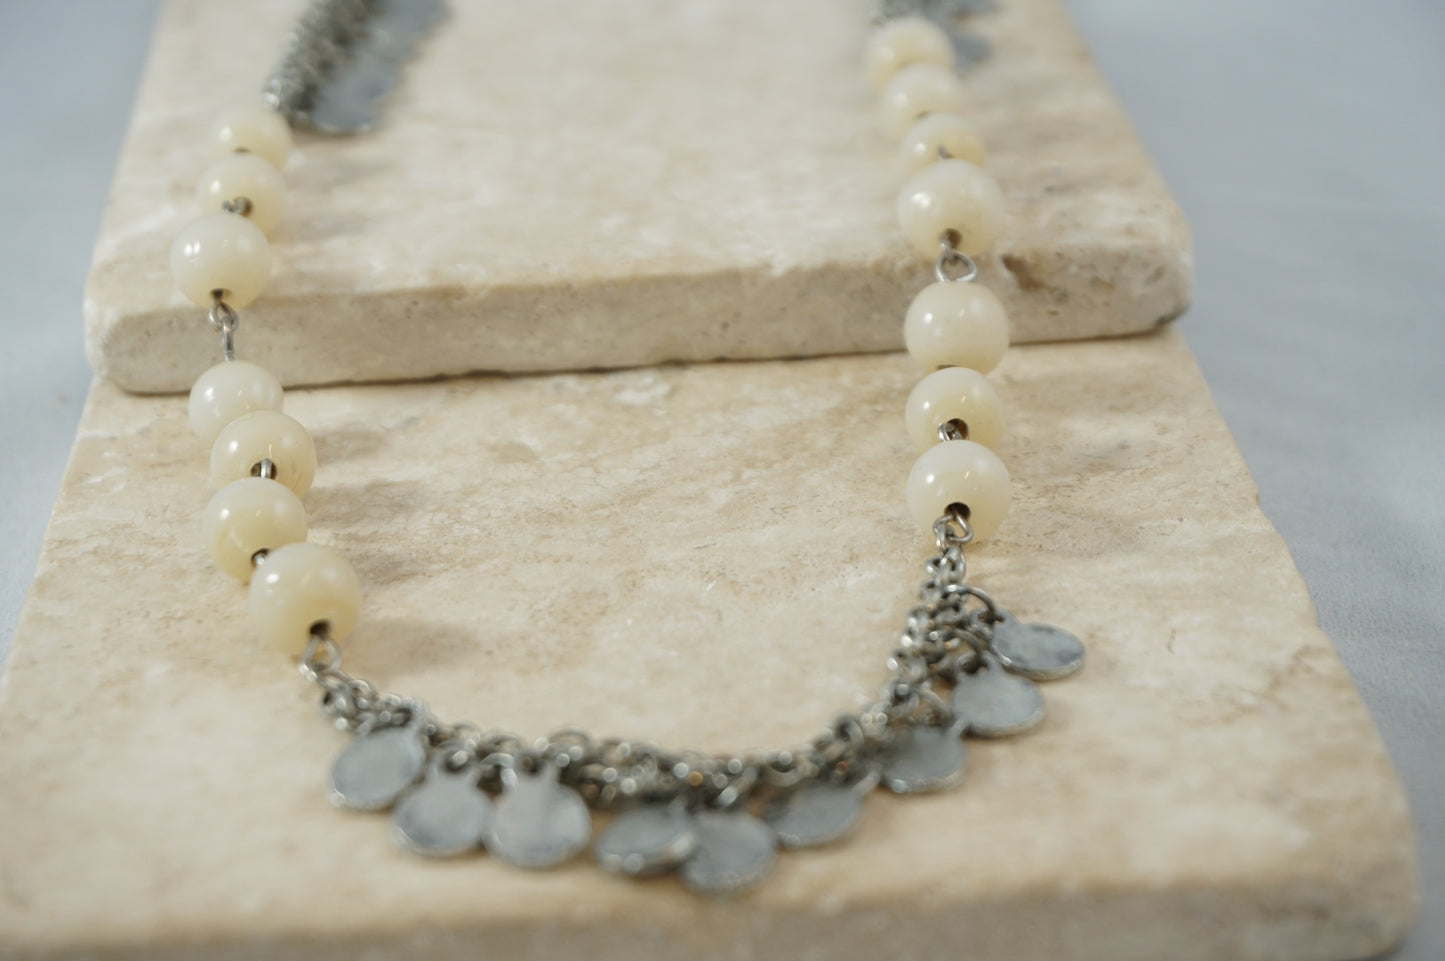 Roe Coin and Bead Necklace